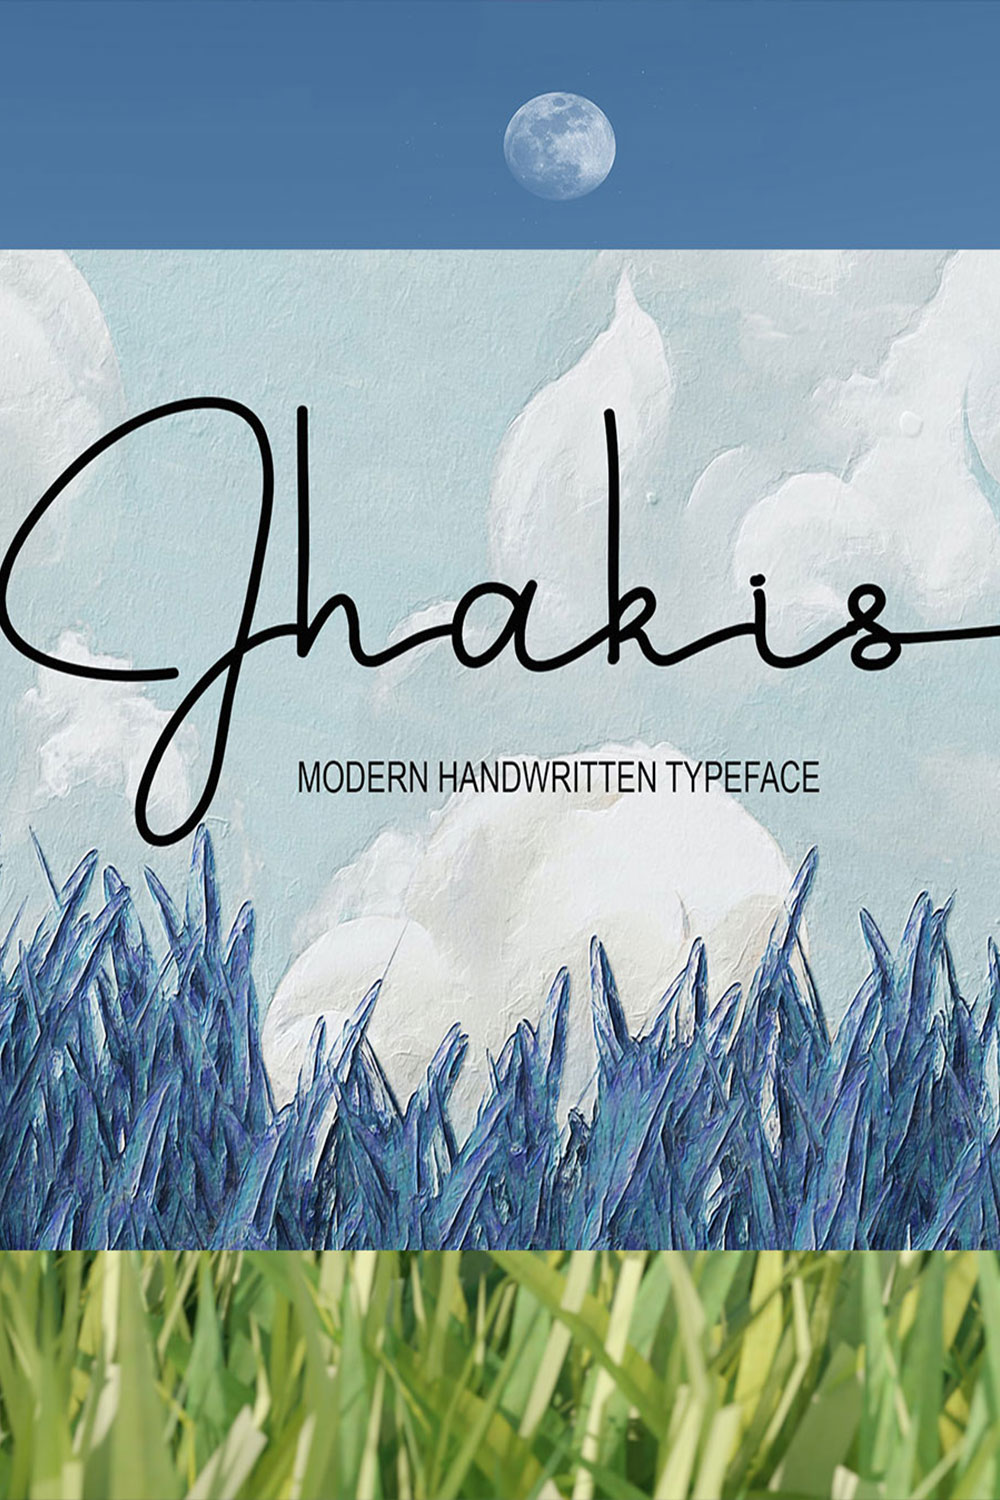 An image with text showing off the adorable Jhakis font.